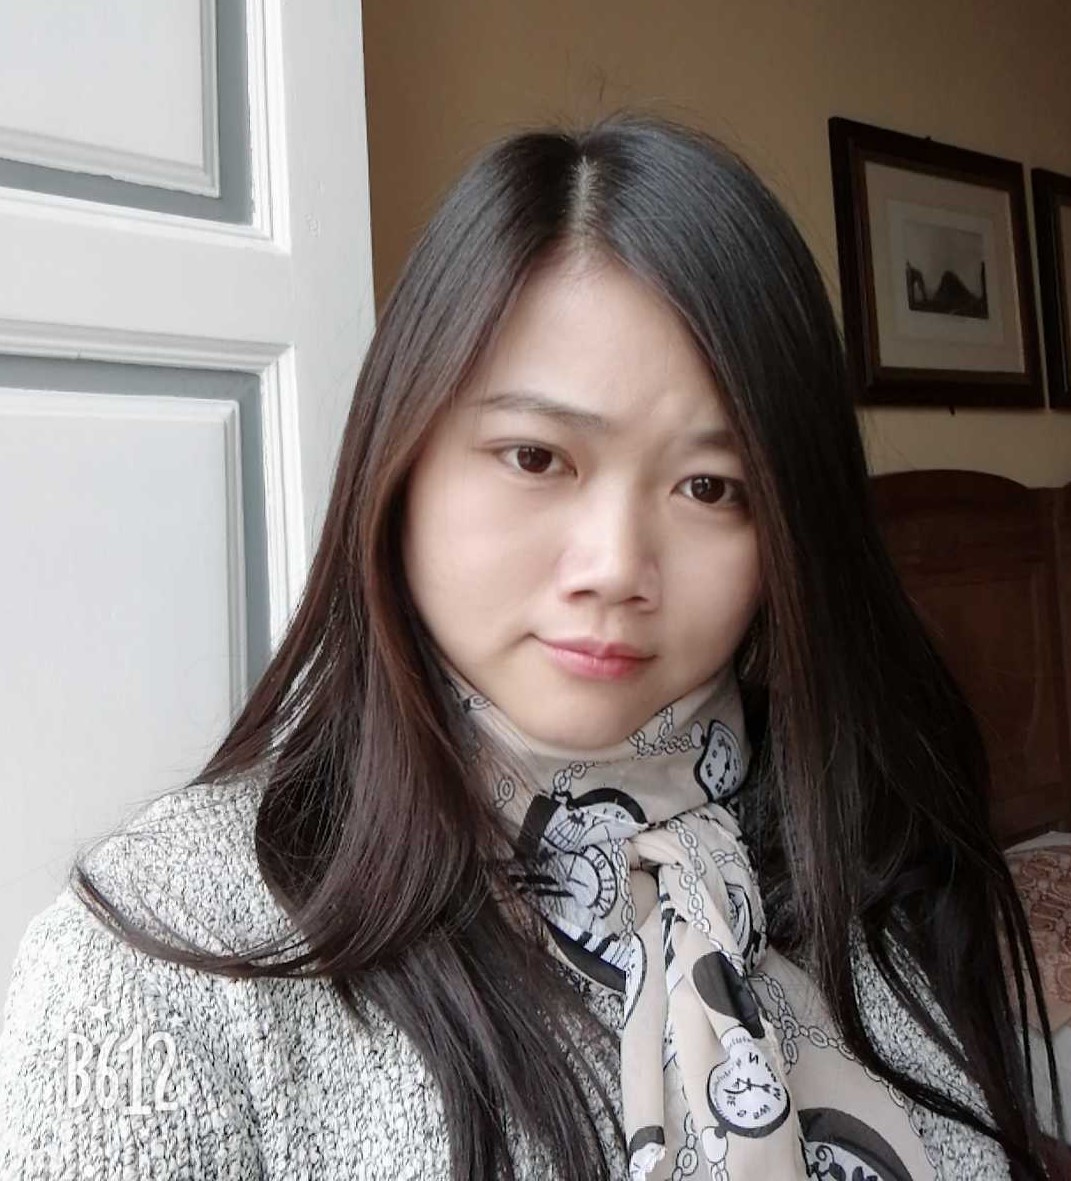 Picture of Yuxuan Cai.